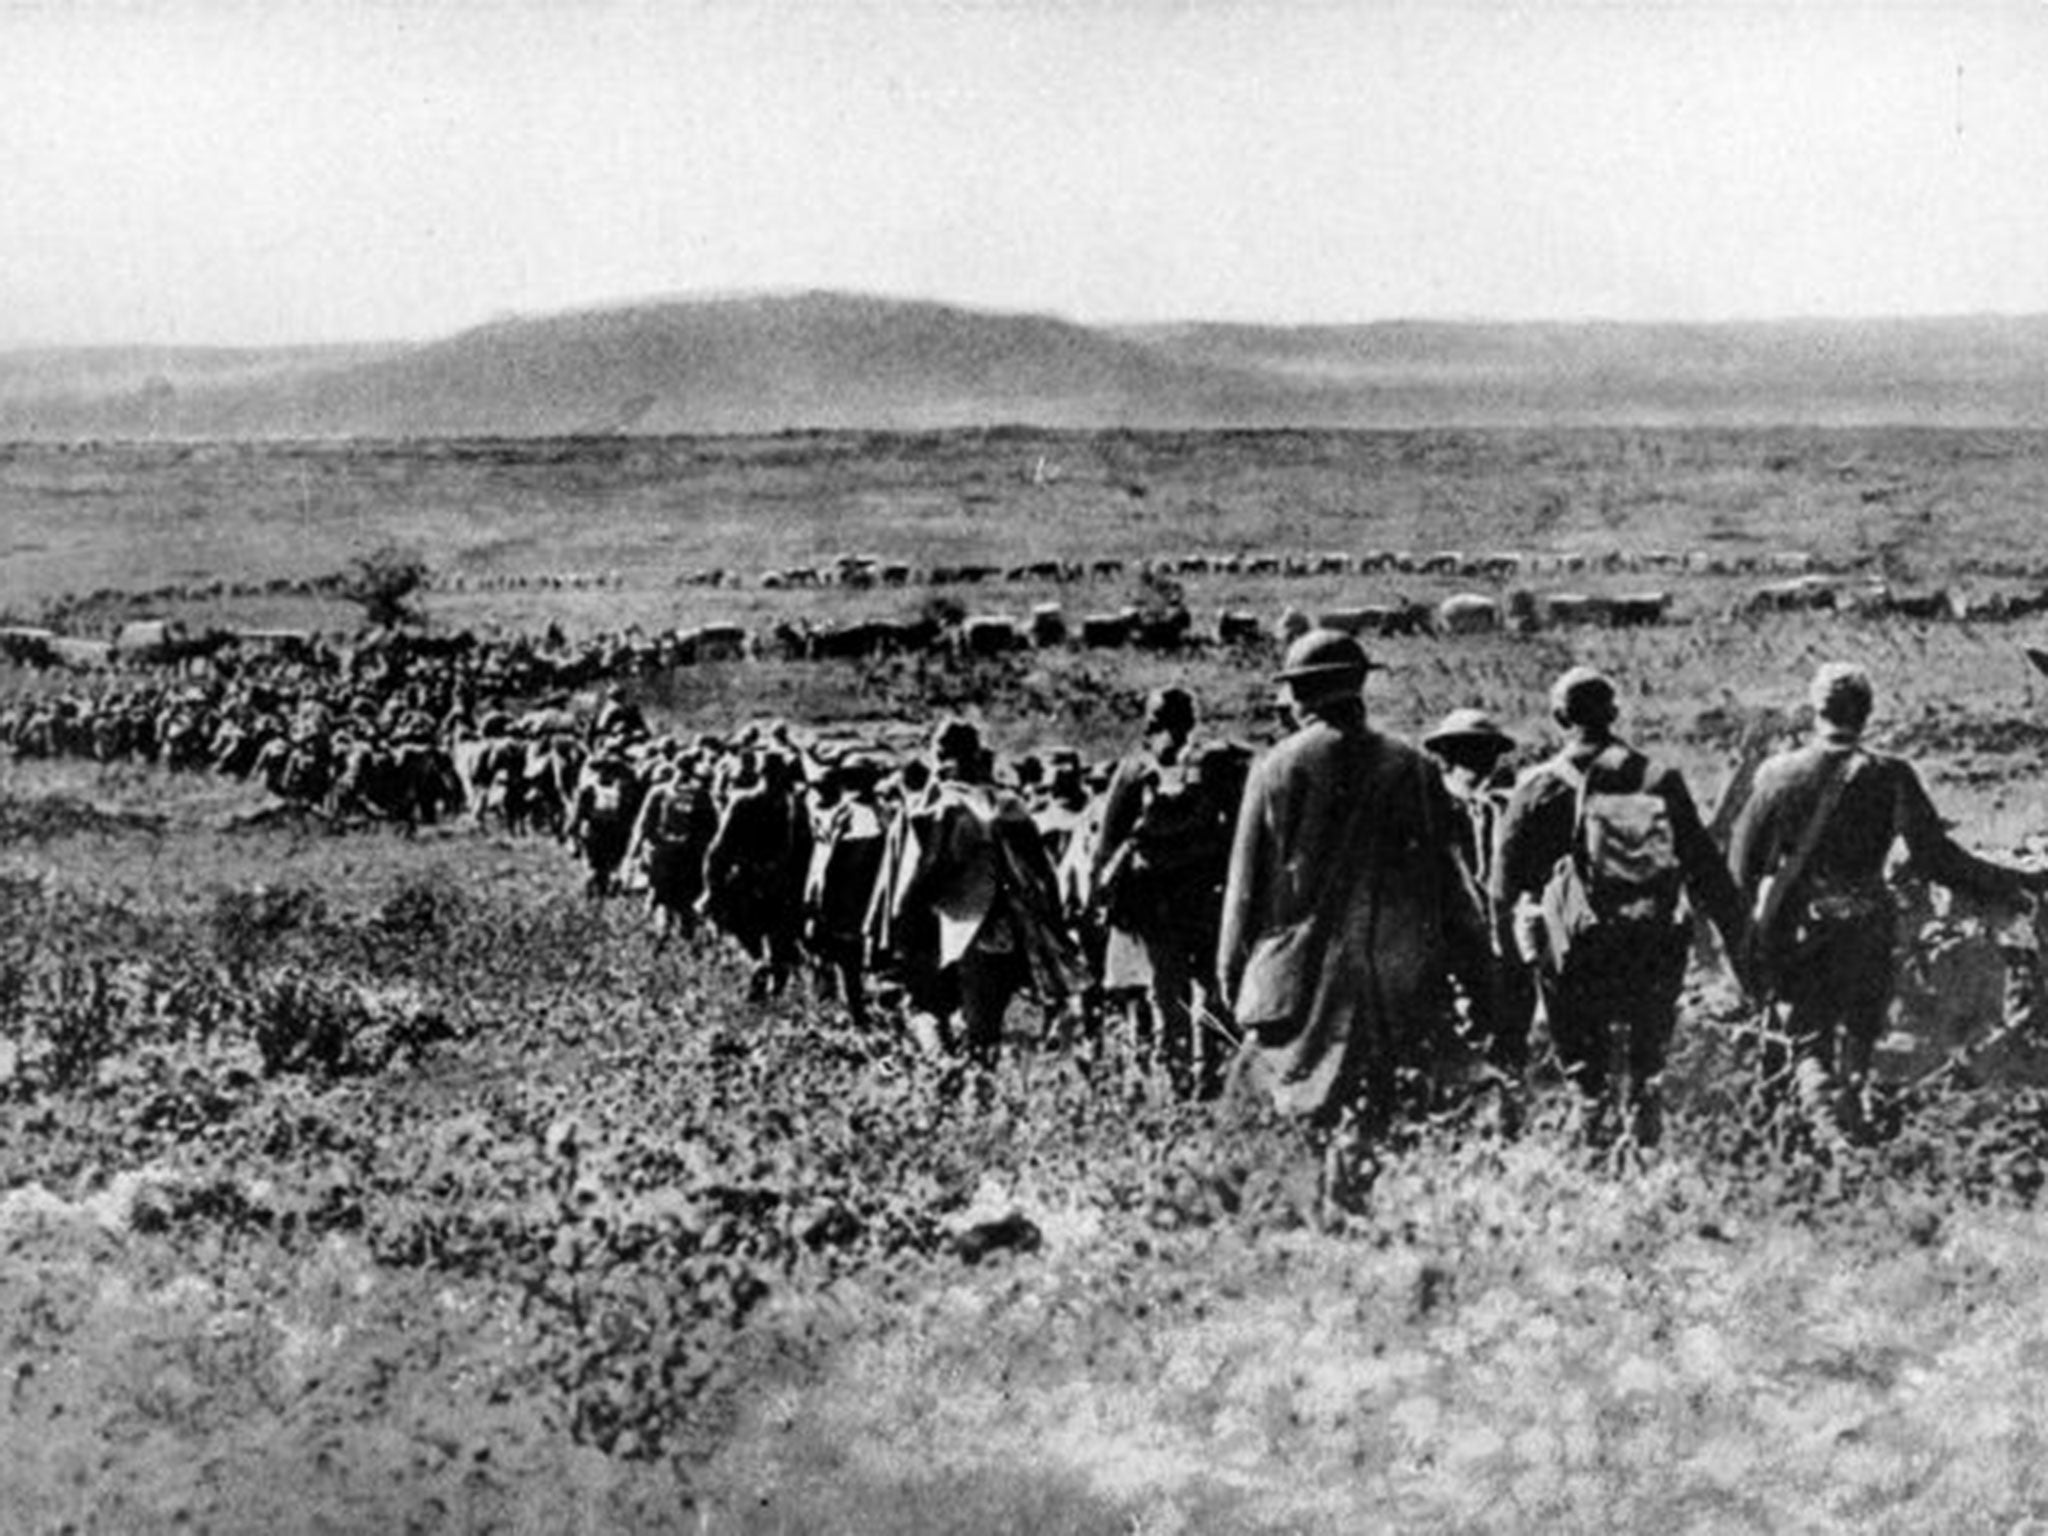 American troops advance on a German position on the Saint Mihiel salient, north-eastern France, in 1918